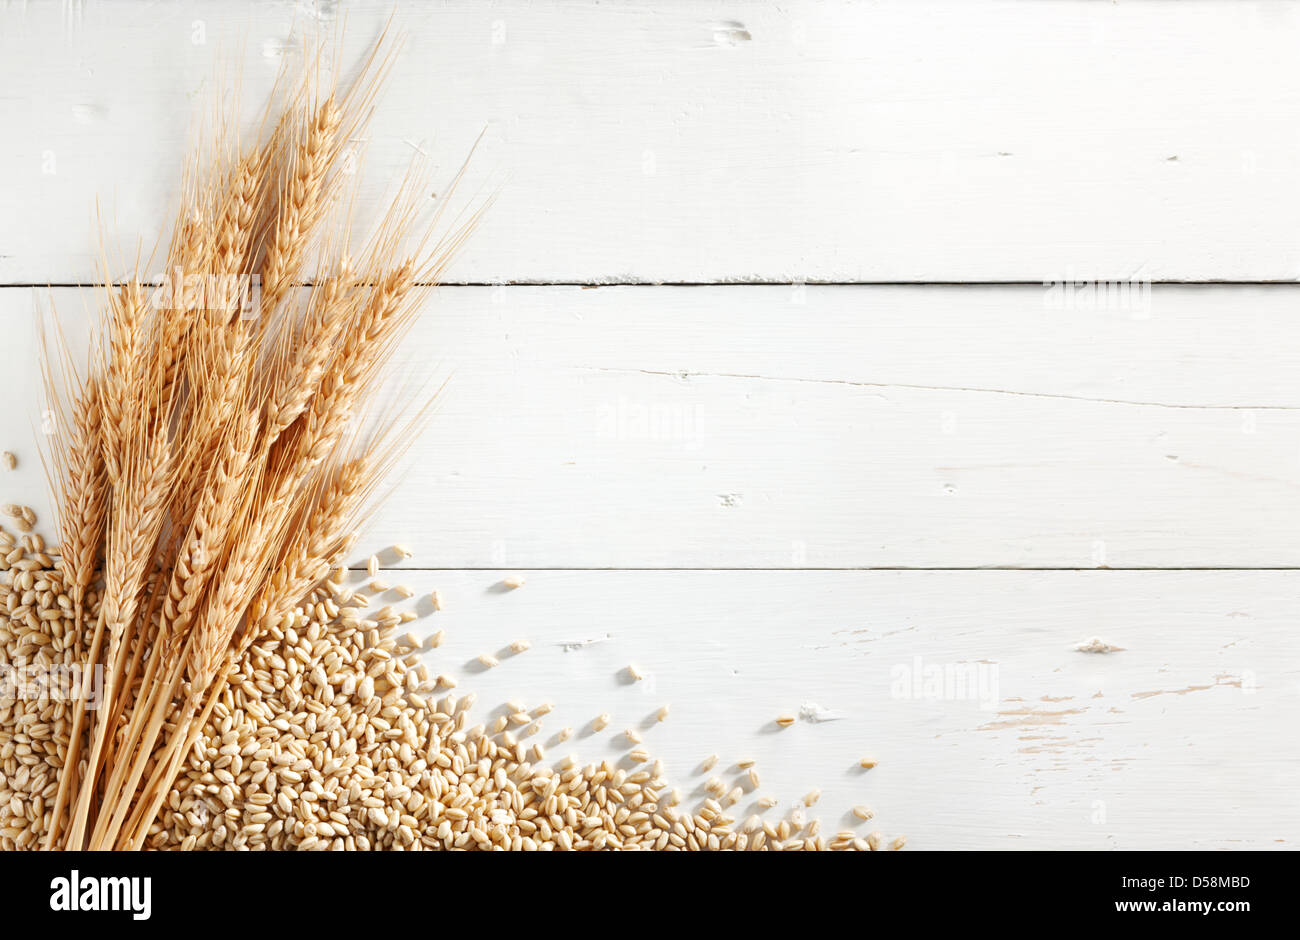 wheat ears with wheat kernels against white wood background Stock Photo